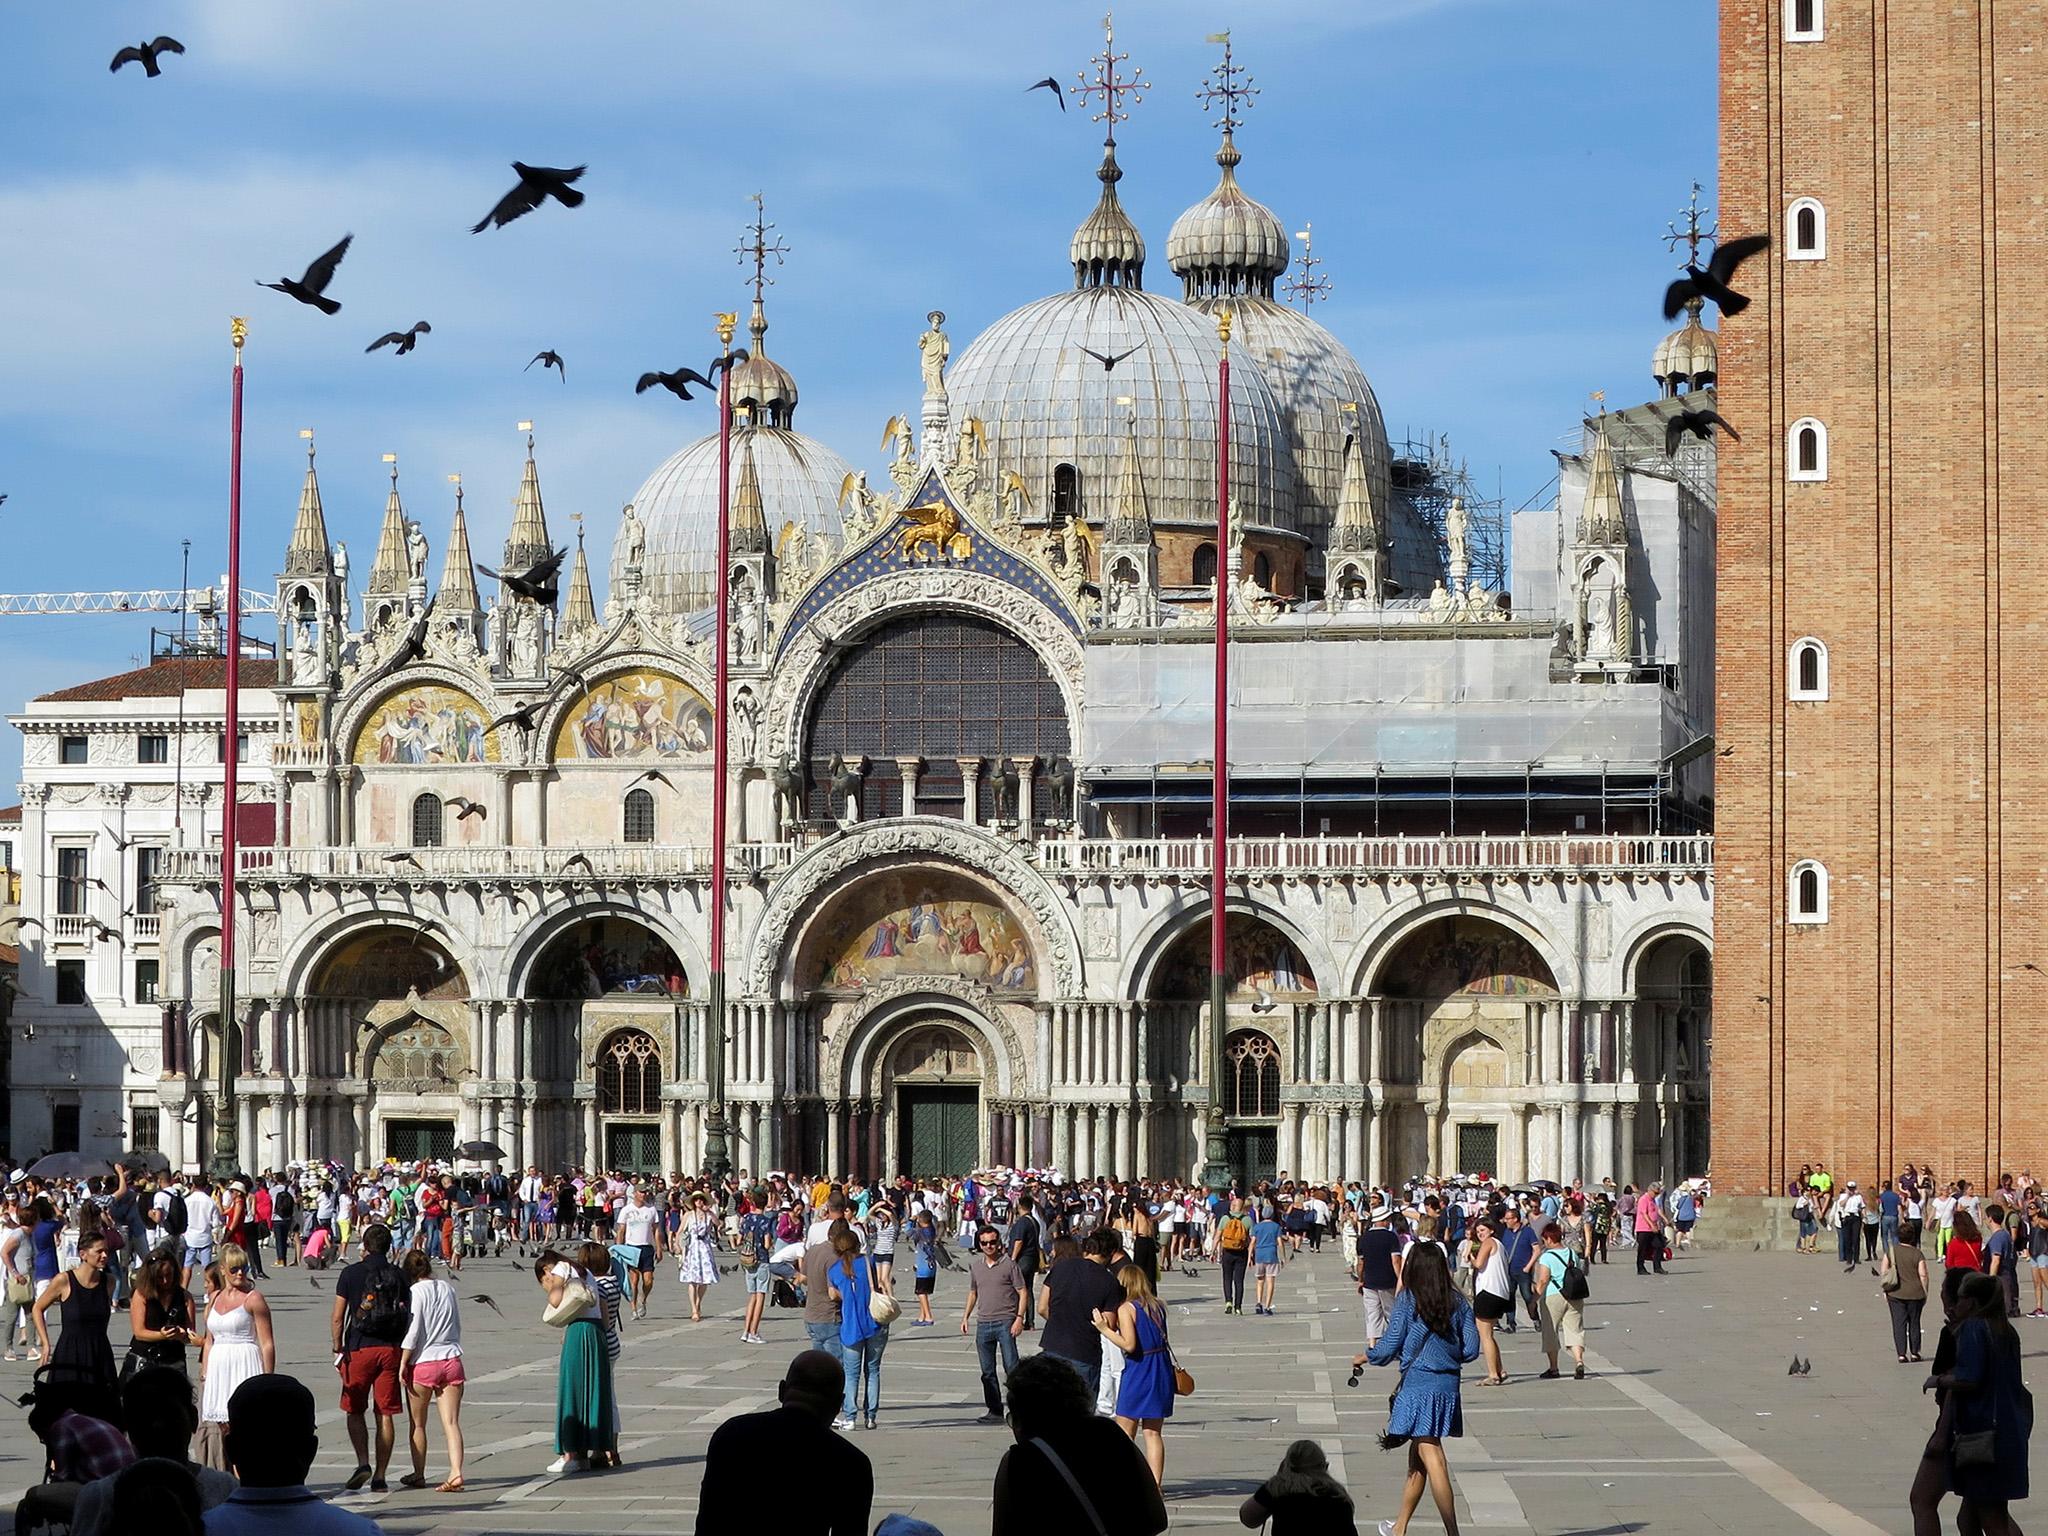 Piazza San Marco (St.Mark's square) in Venice, Italy